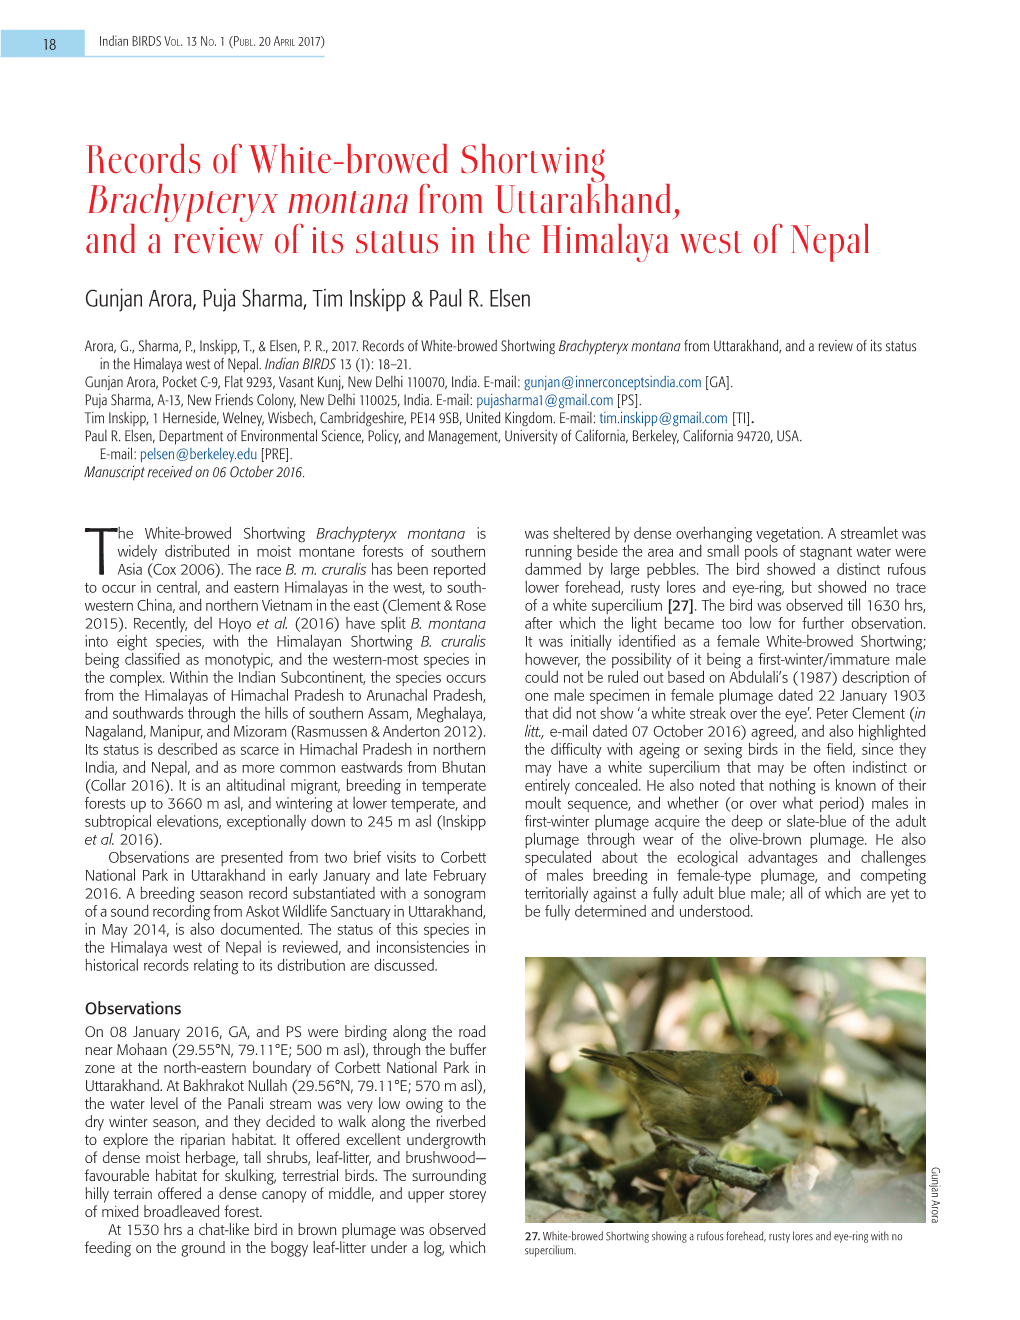 Records of White-Browed Shortwing Brachypteryx Montana from Uttarakhand, and a Review of Its Status in the Himalaya West of Nepal